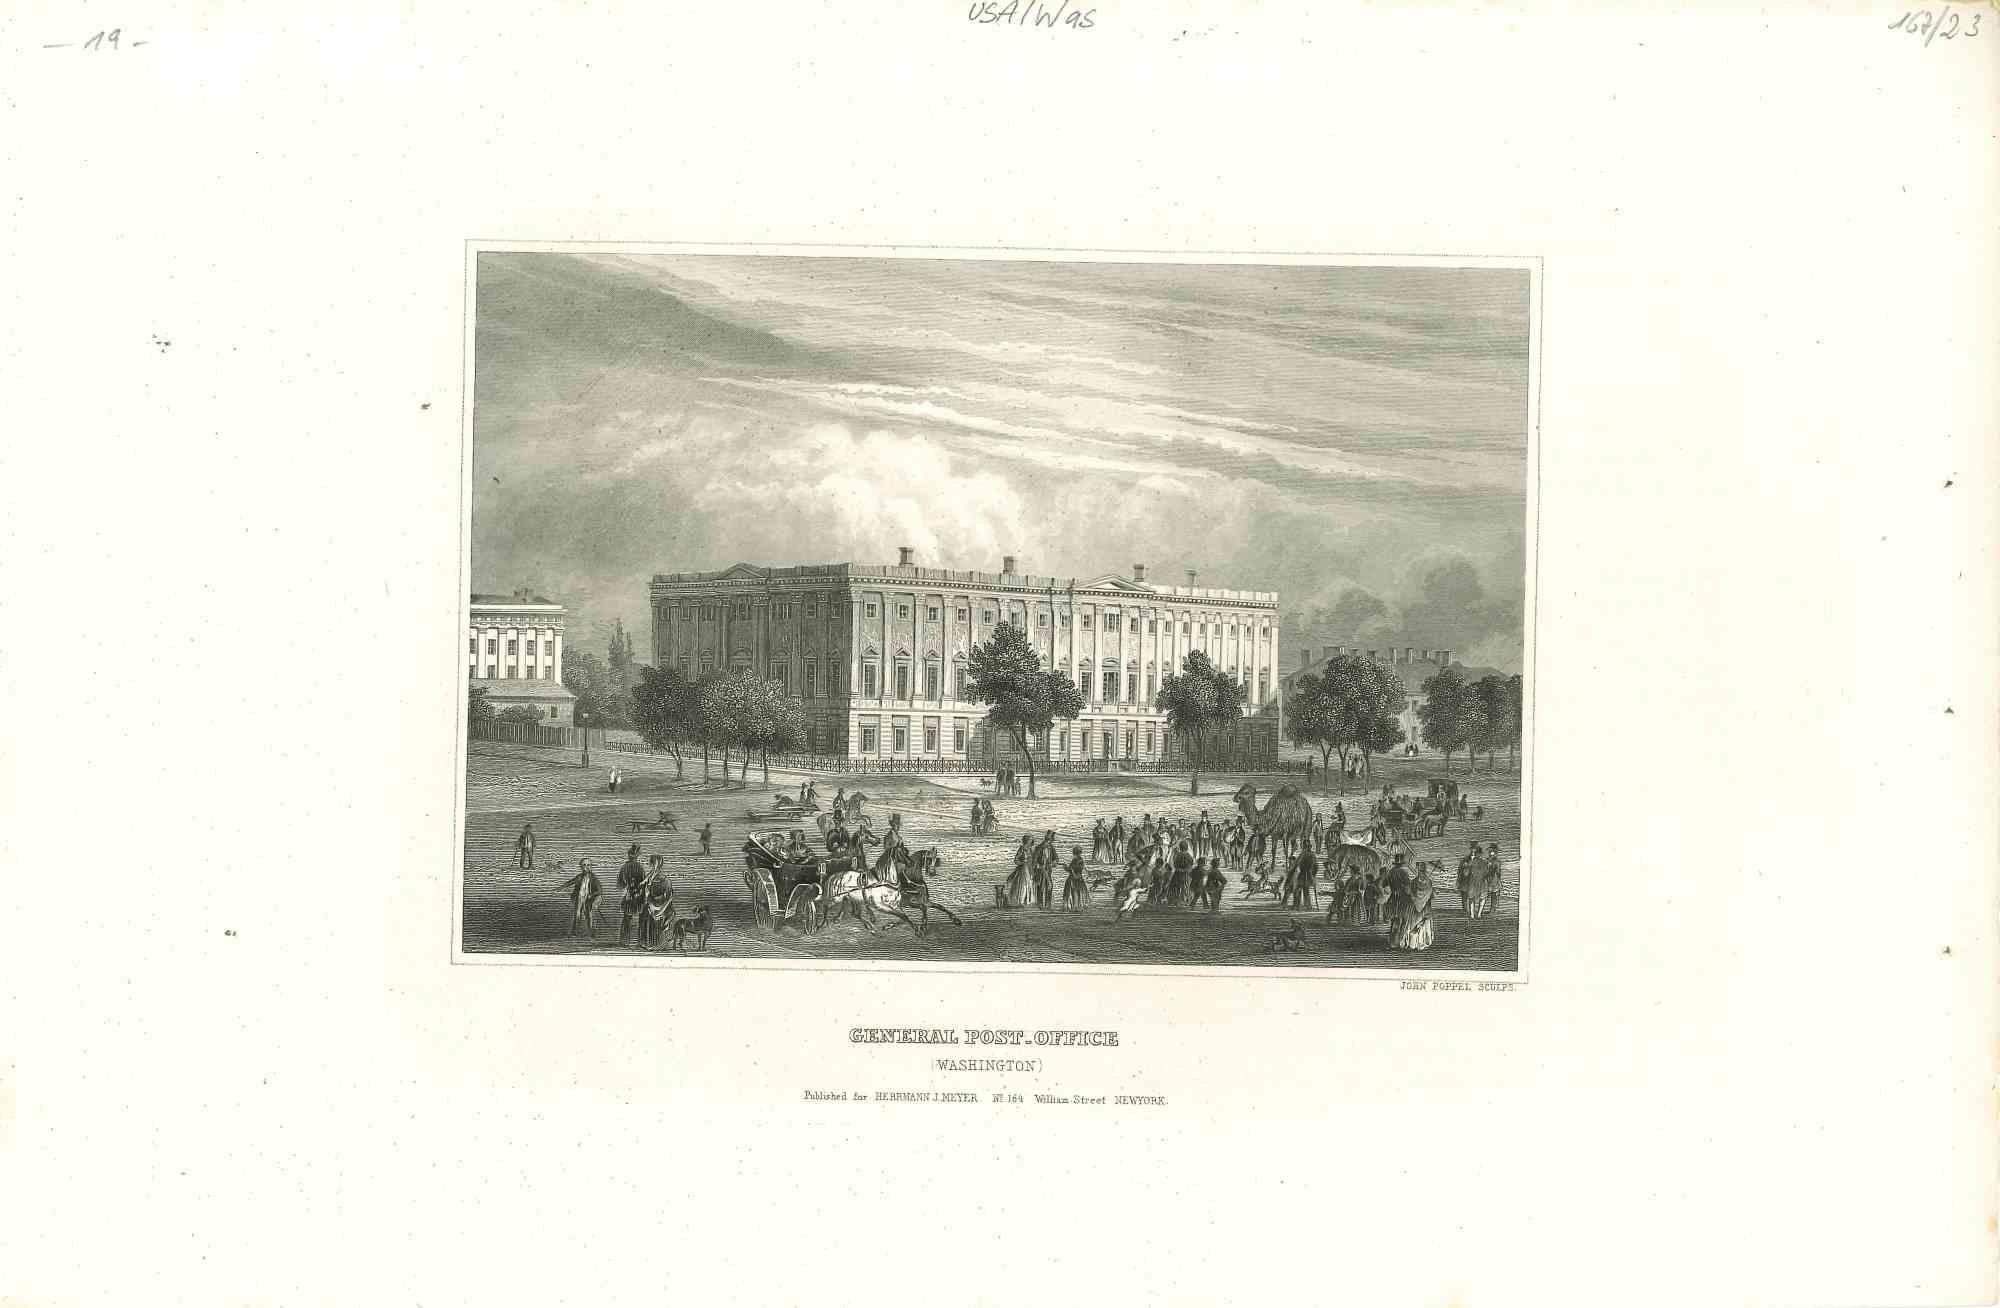 Unknown Landscape Print - Ancient View of General Post Office - Original Lithograph - 1850s